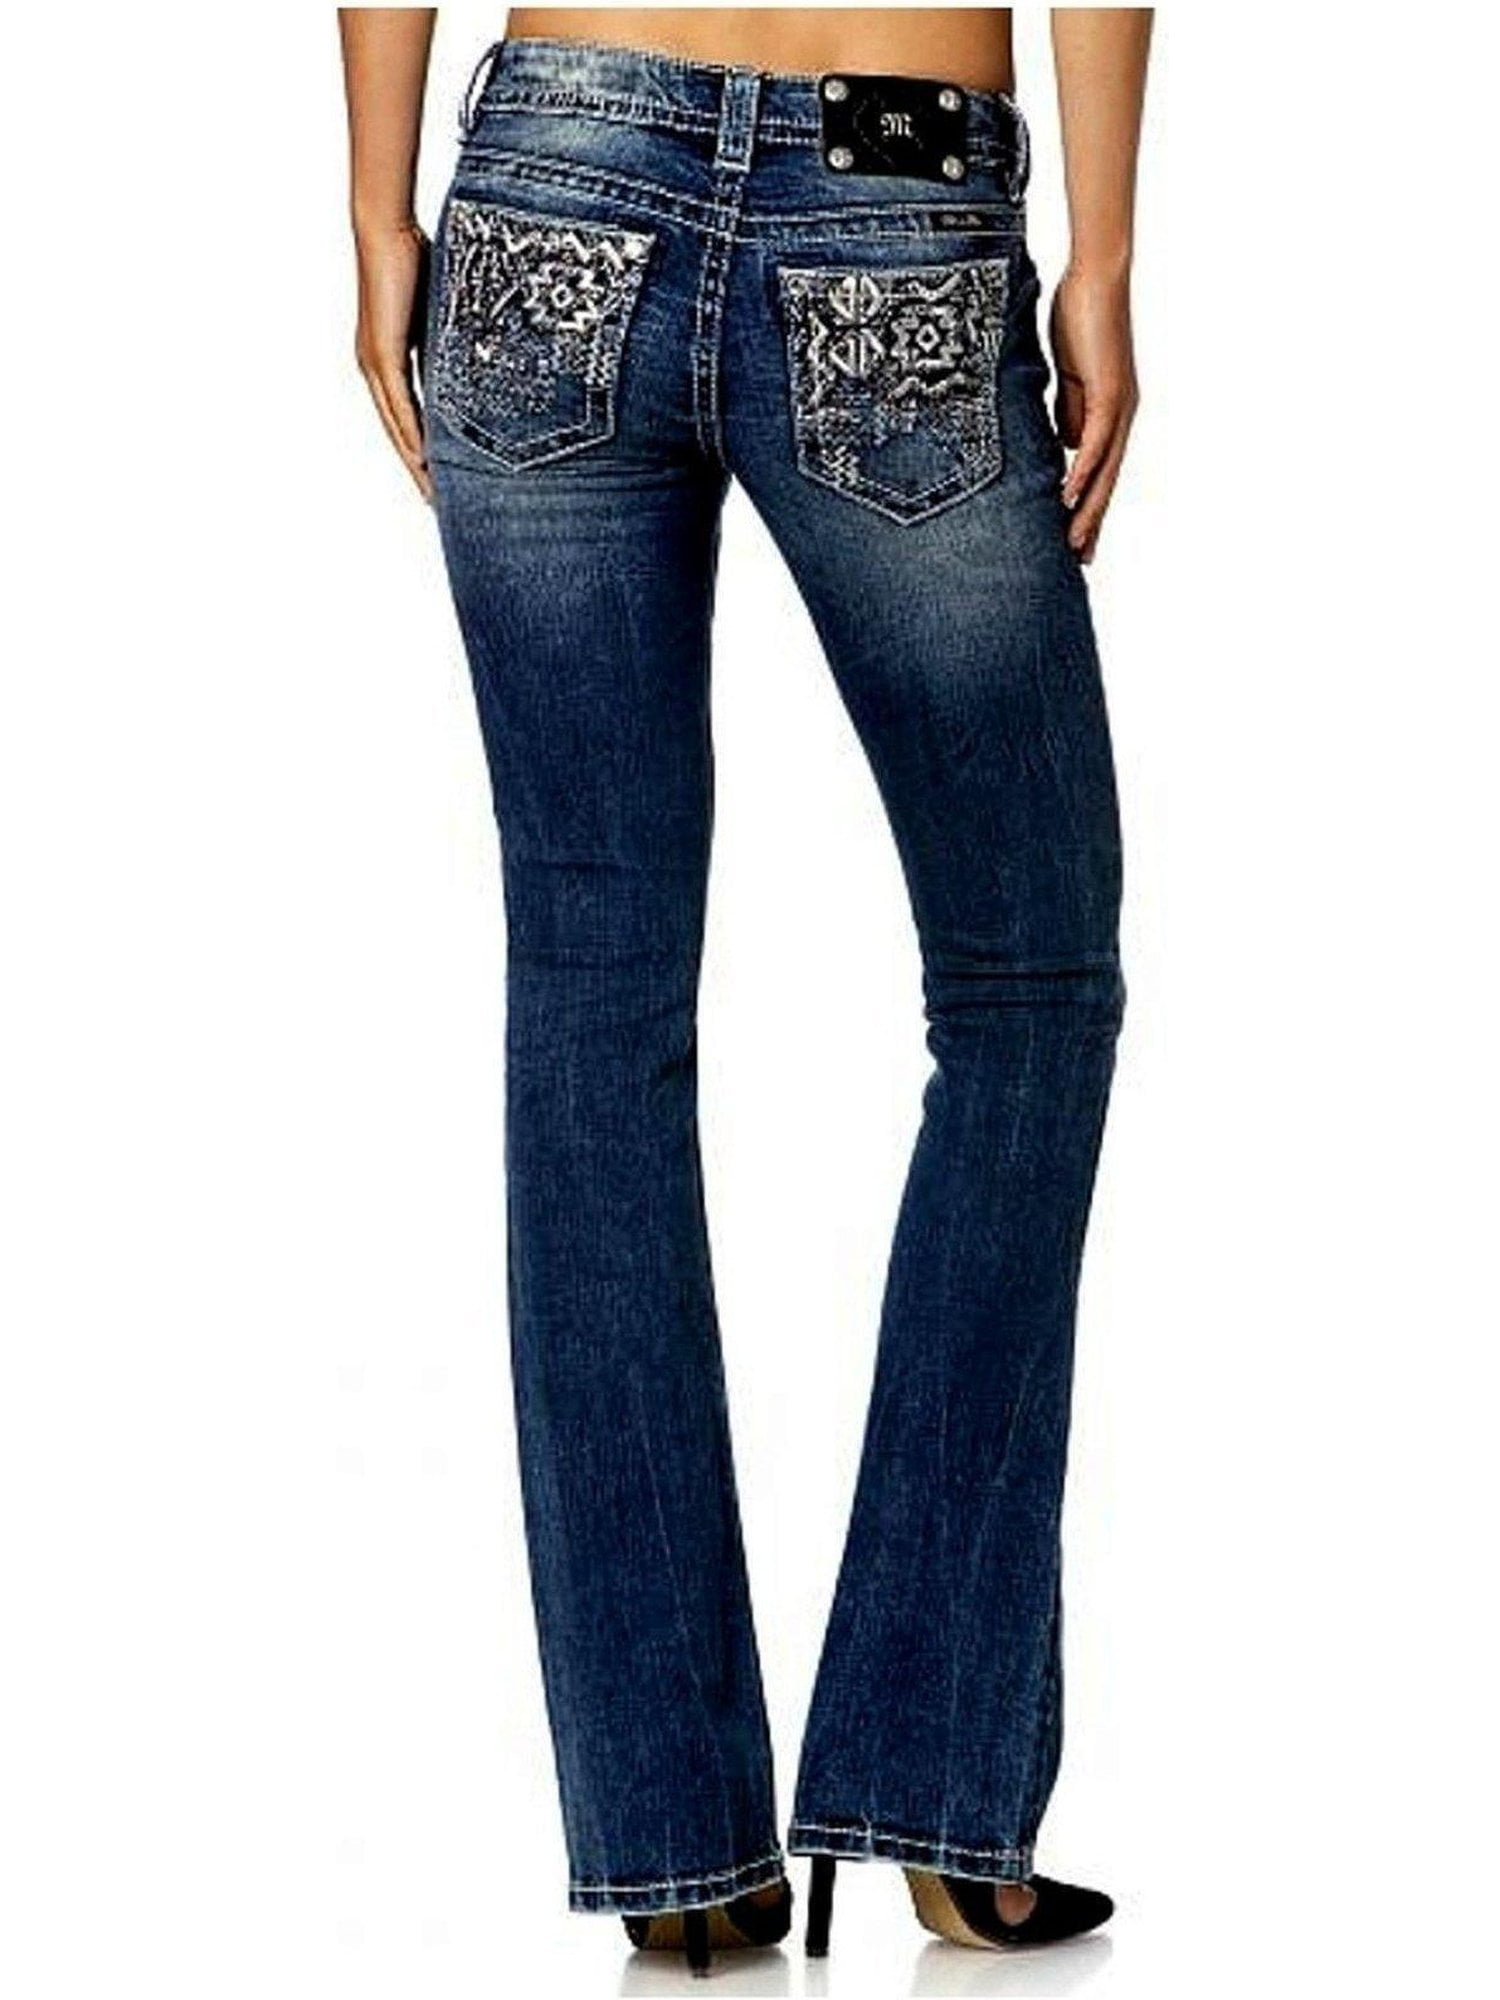 Miss Me Womens Metallic Embroidered Back Pocket Skinny Jeans